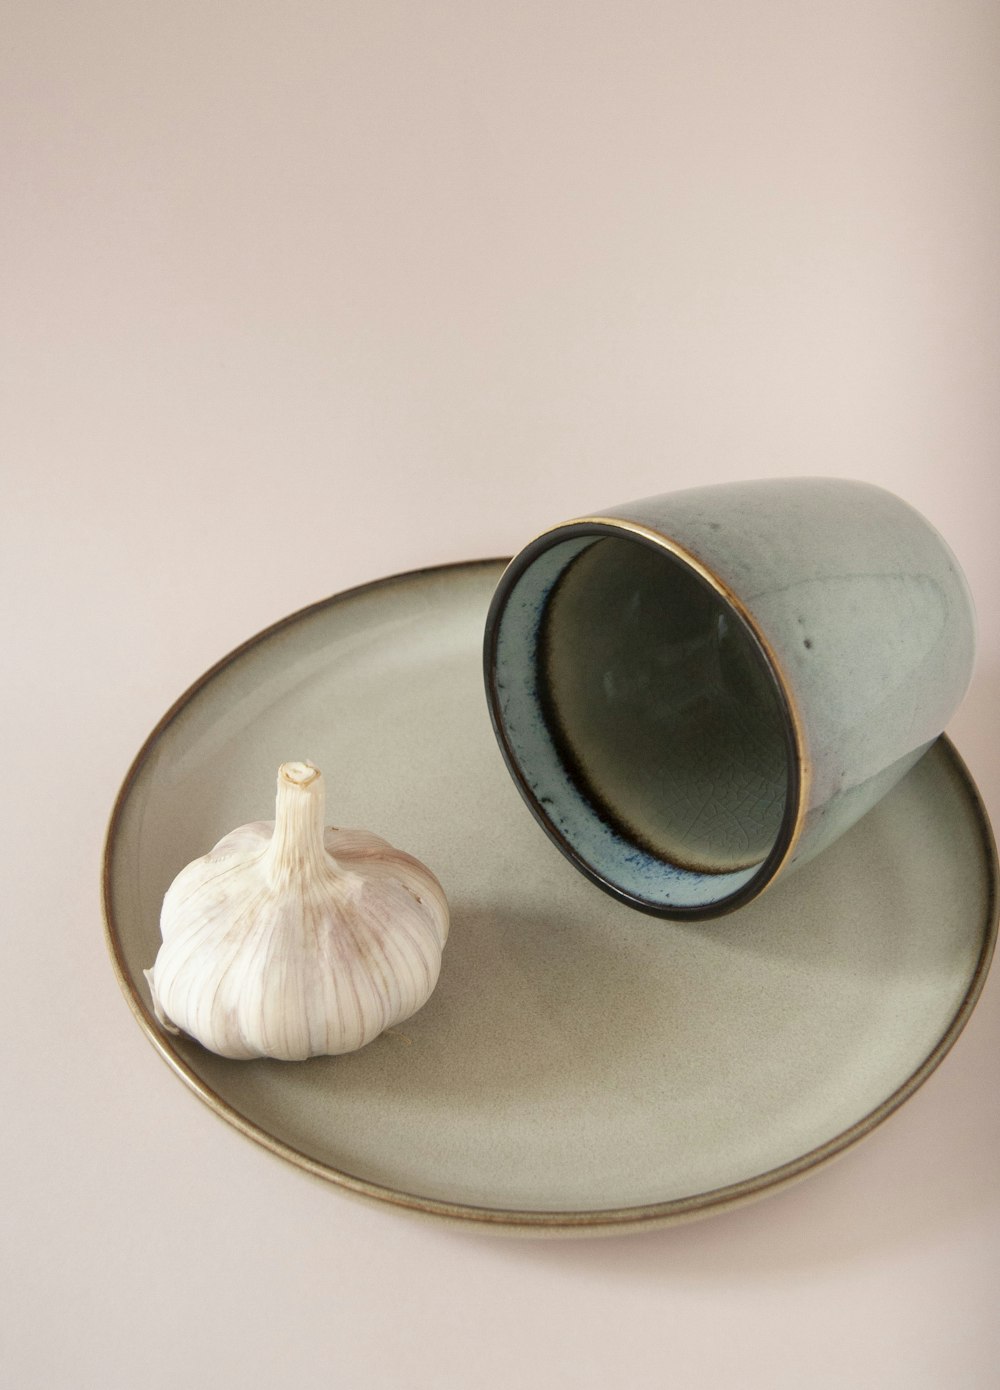 a garlic bulb sitting on a plate next to a vase